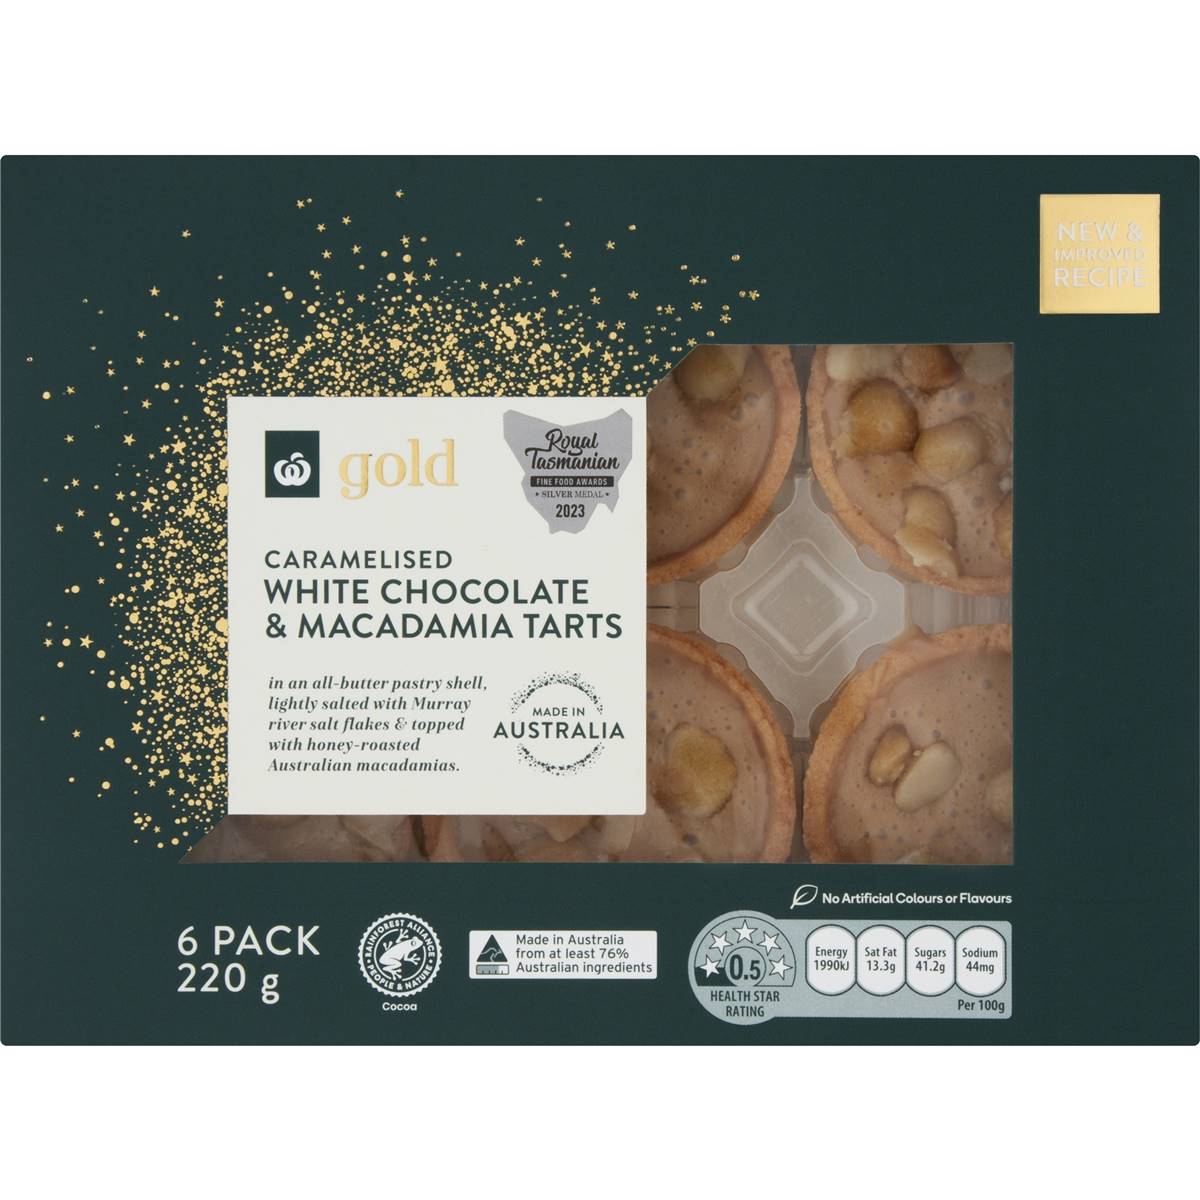 Calories in Woolworths Gold White Chocolate & Macadamia Tarts